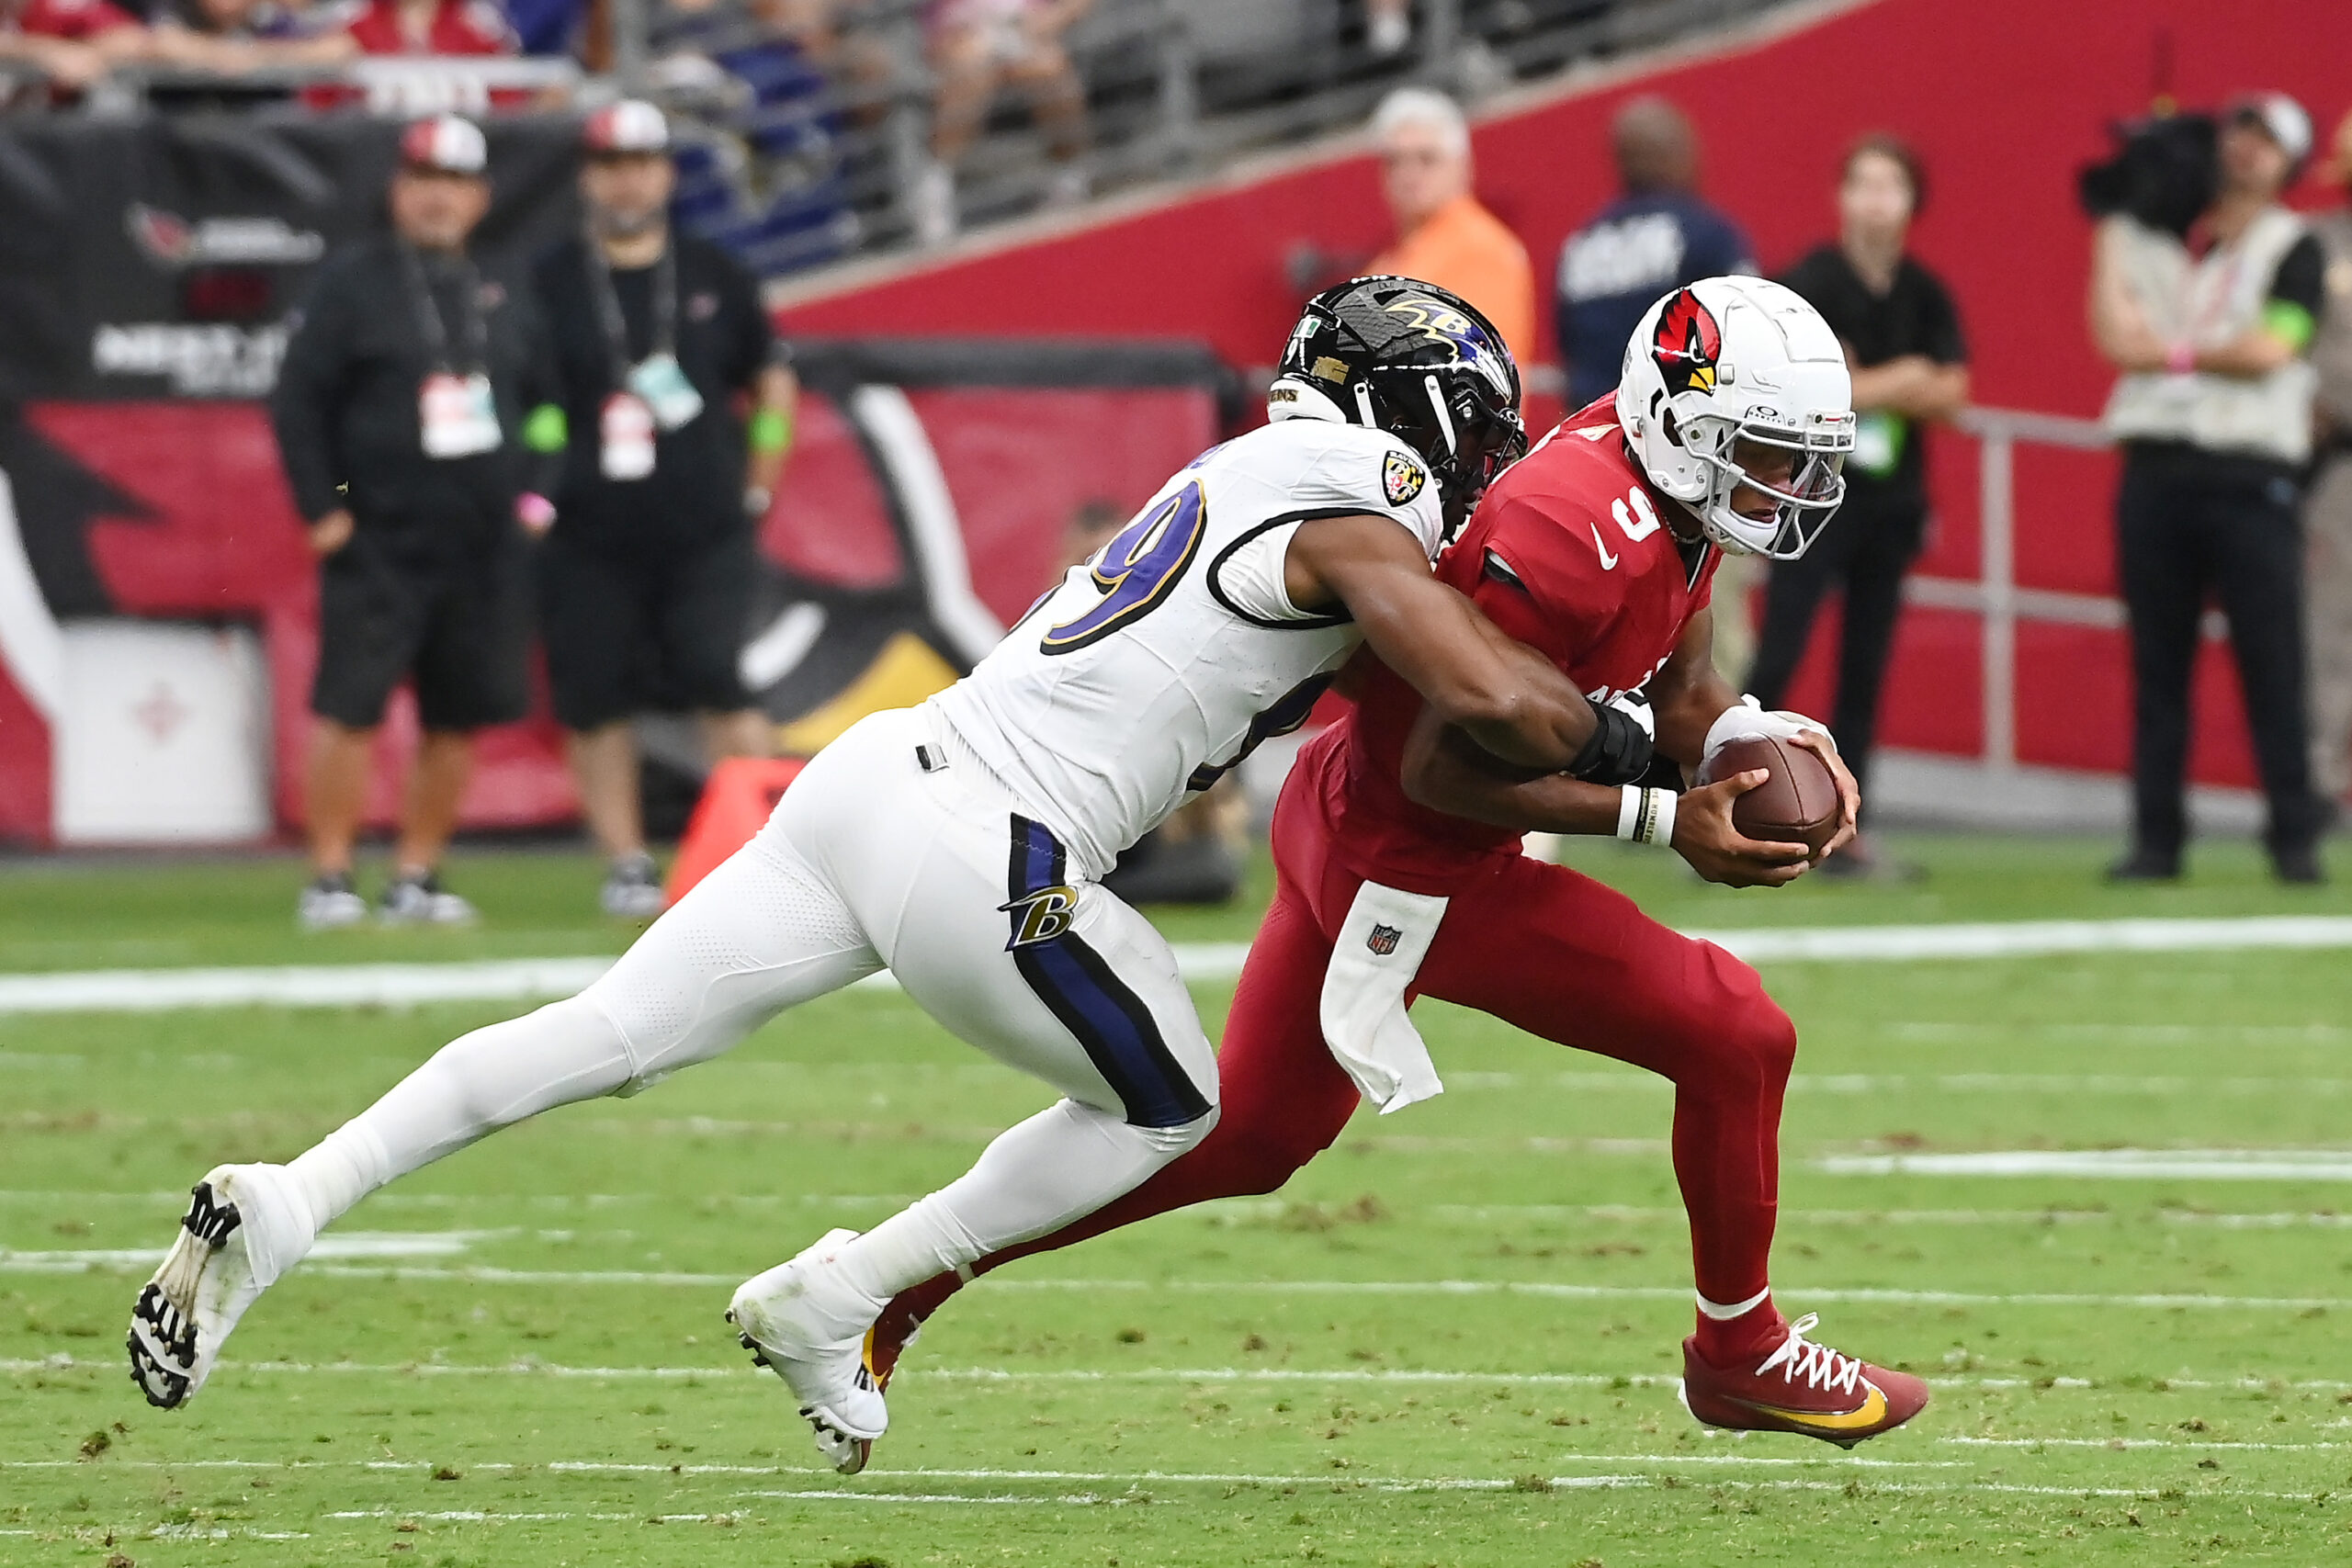 Cardinals offense sputters after opening drive touchdown in loss to Ravens